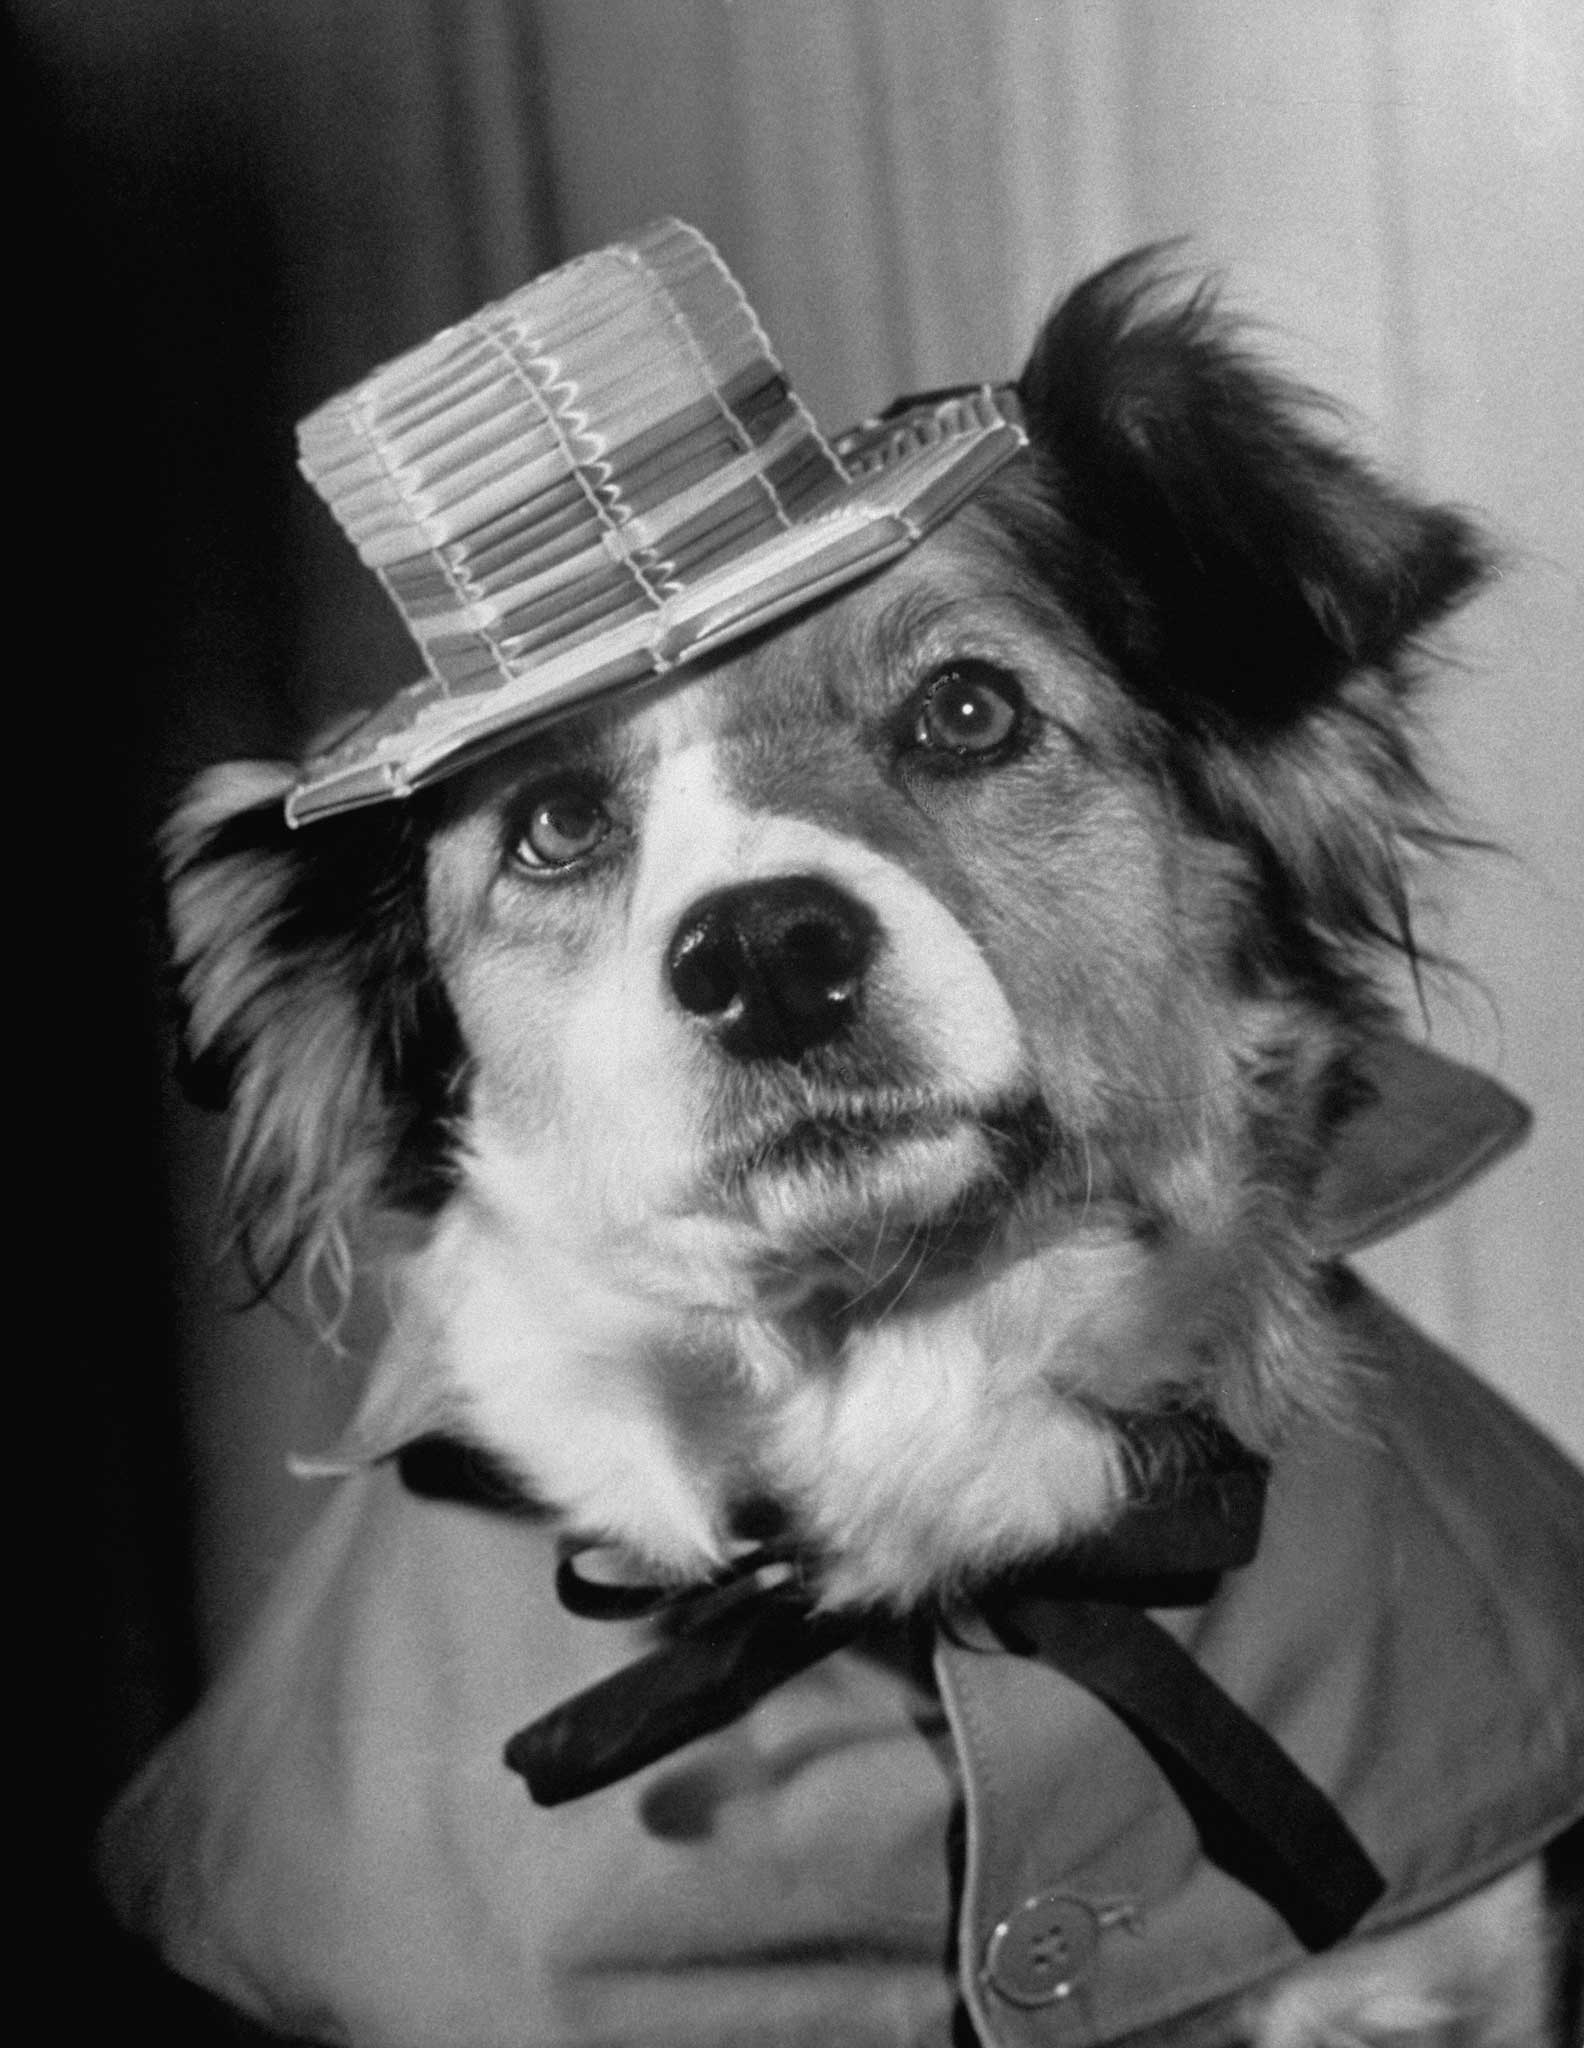 Lucky in the movie, "The Lost Dog".